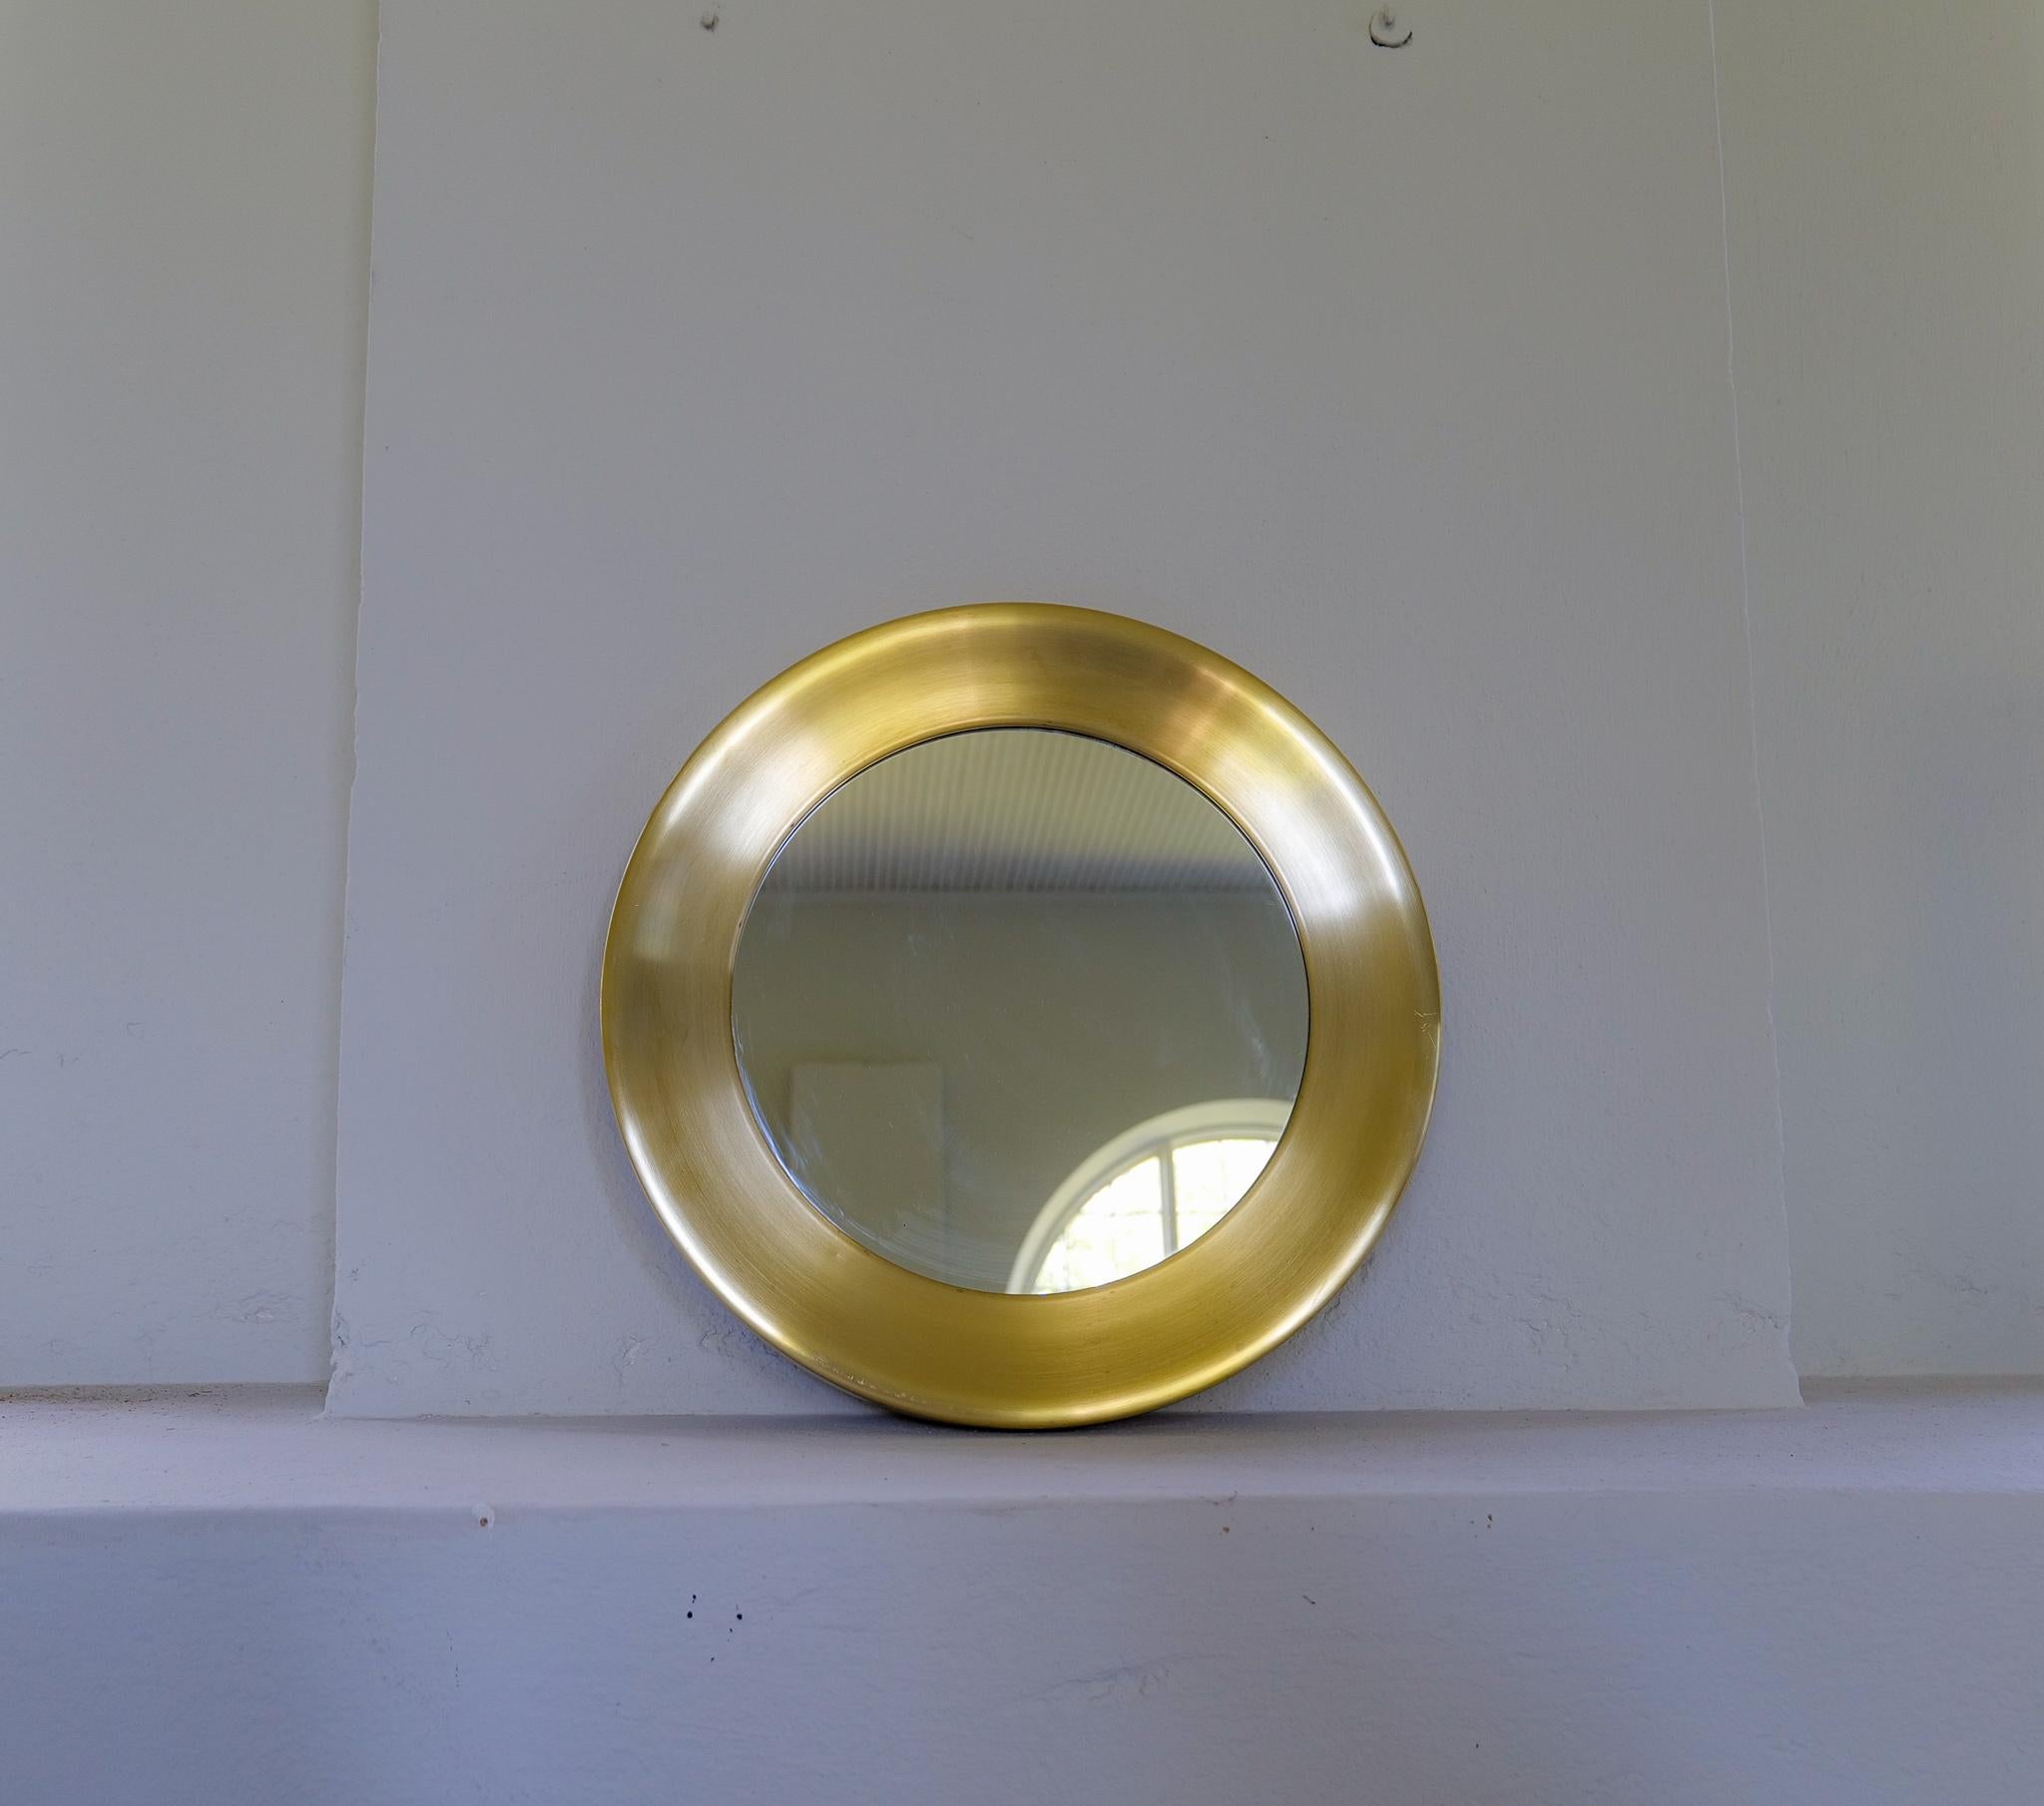 Round glass mirror from Glasmäster with brass frame. It was made in Sweden for Glasmäster (glass master) in Markaryd and is often connected to Hans Agne Jakobsson Work in Markaryd.

This mirror is in good condition, one small bump and some stains